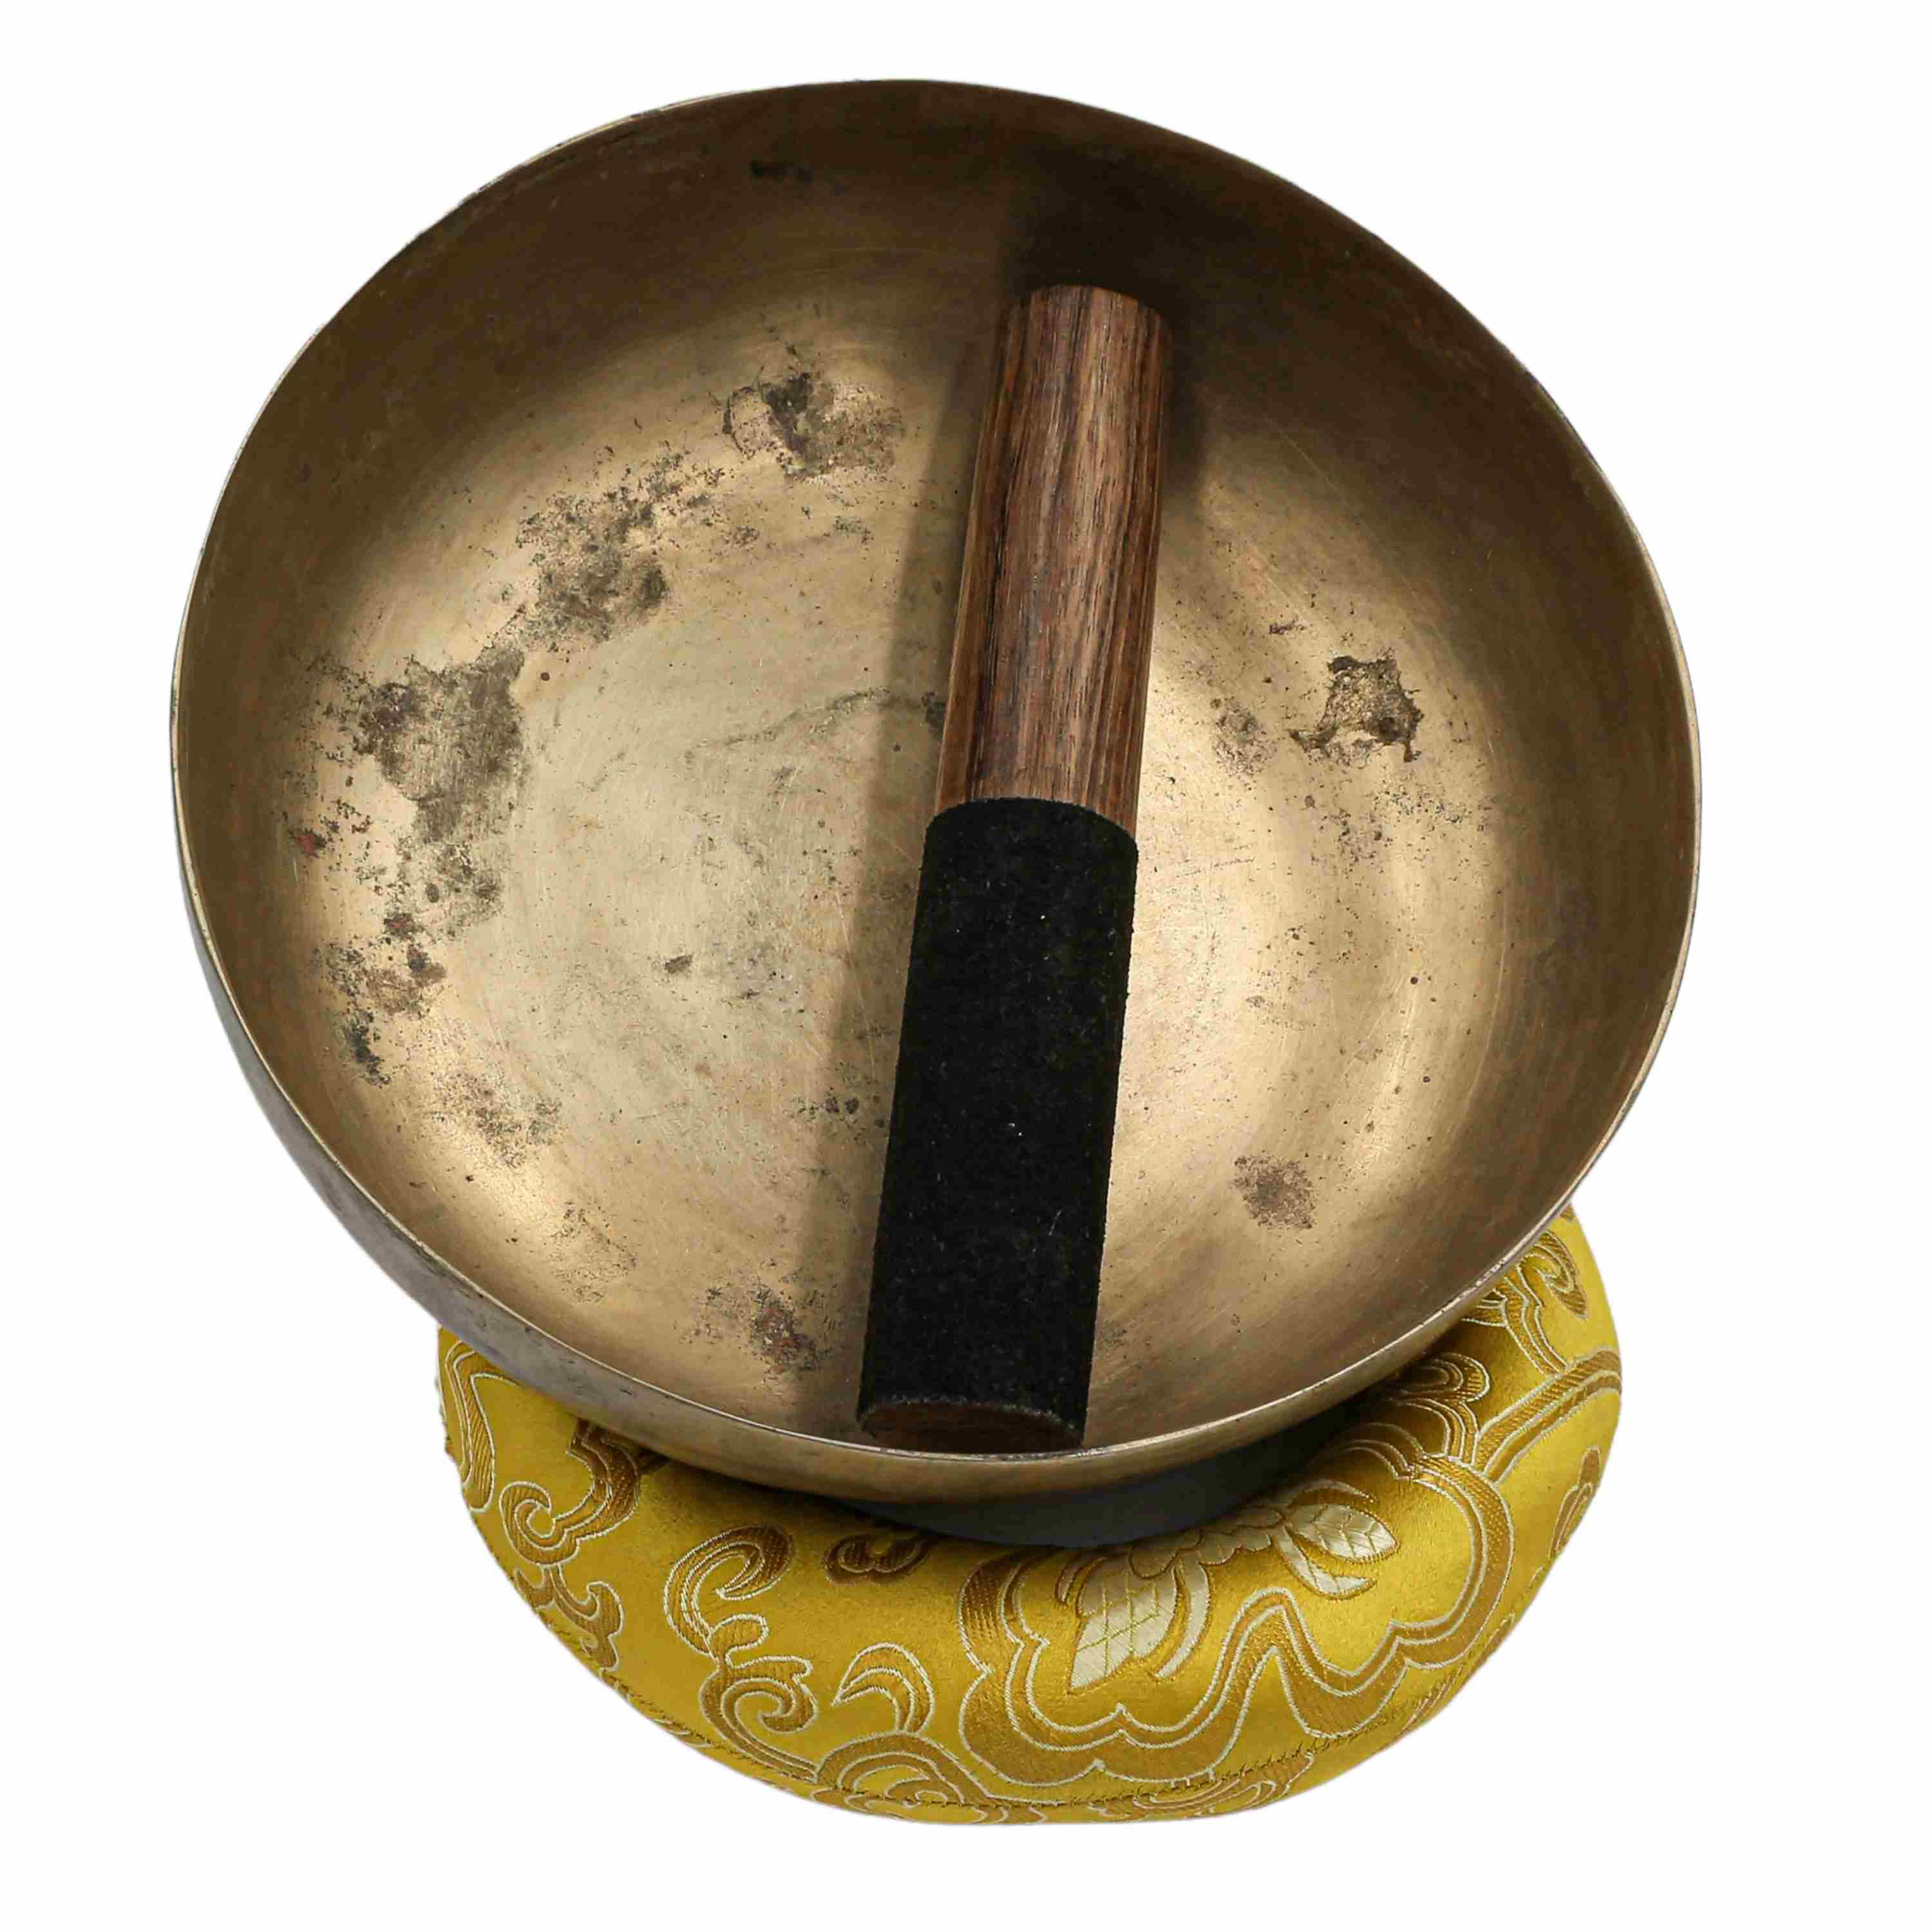 old, Buddhist real Antique Hand Beaten Singing Bowl